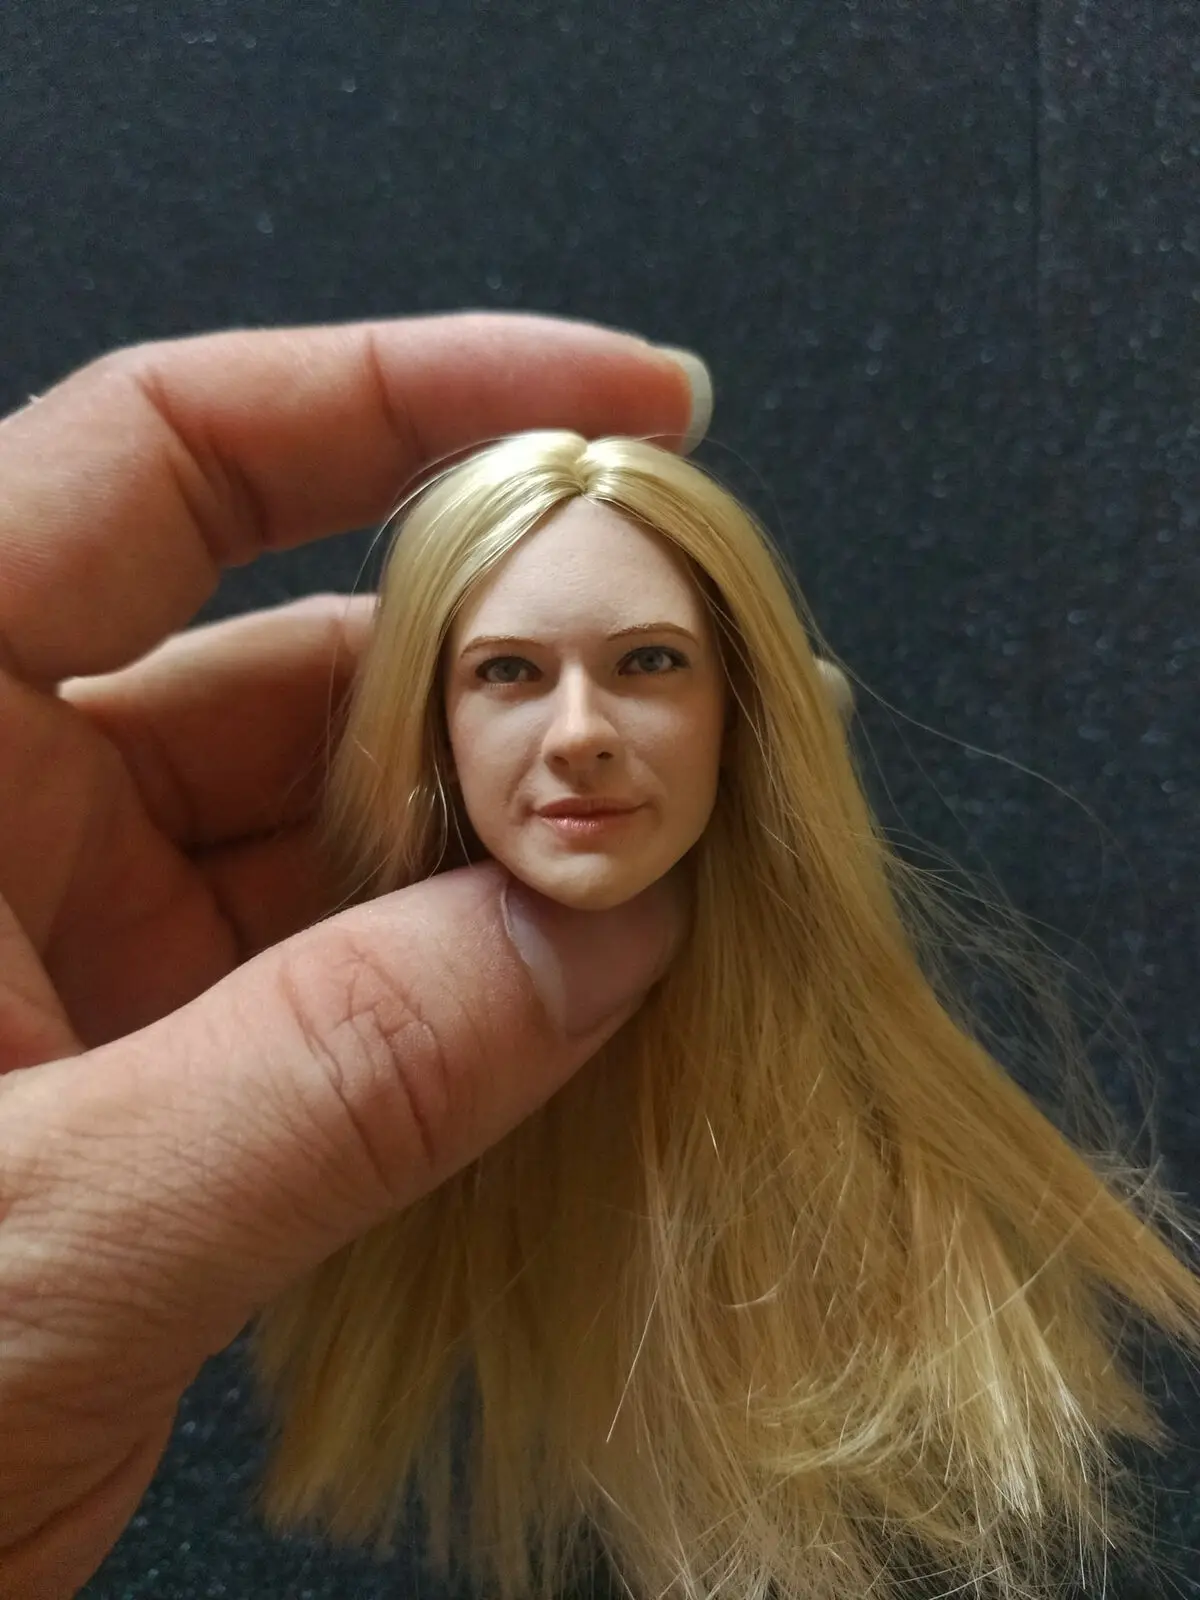 DID Crisis Edge 1/6th Fringe TV-O Head Carving Model for 12" Doll